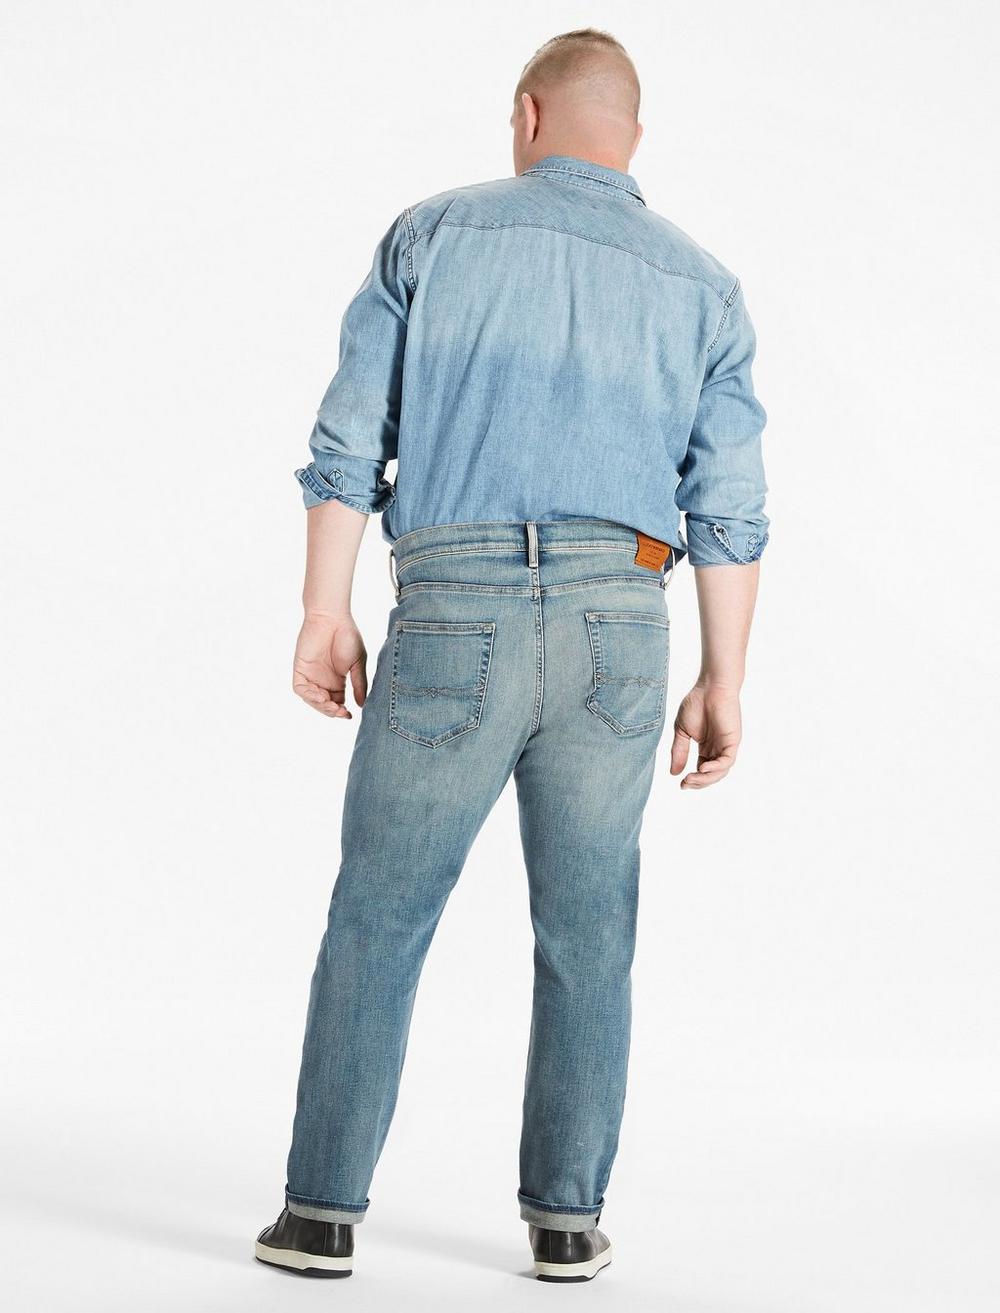 ATHLETIC BIG & TALL JEAN | Lucky Brand